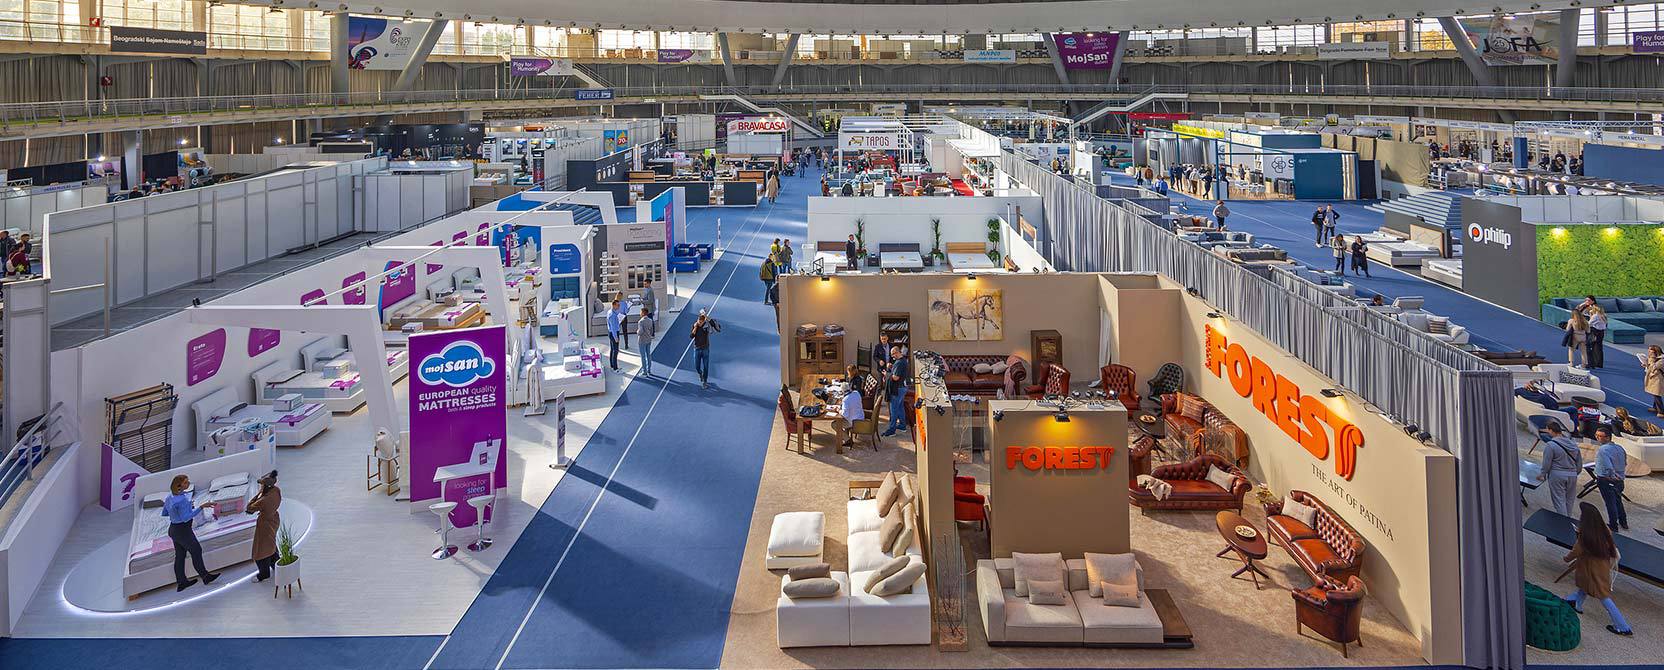 Trade shows are a great way to promote your business, but the costs can add up quickly. Here’s how to get the most impact for your promo items for trade shows.